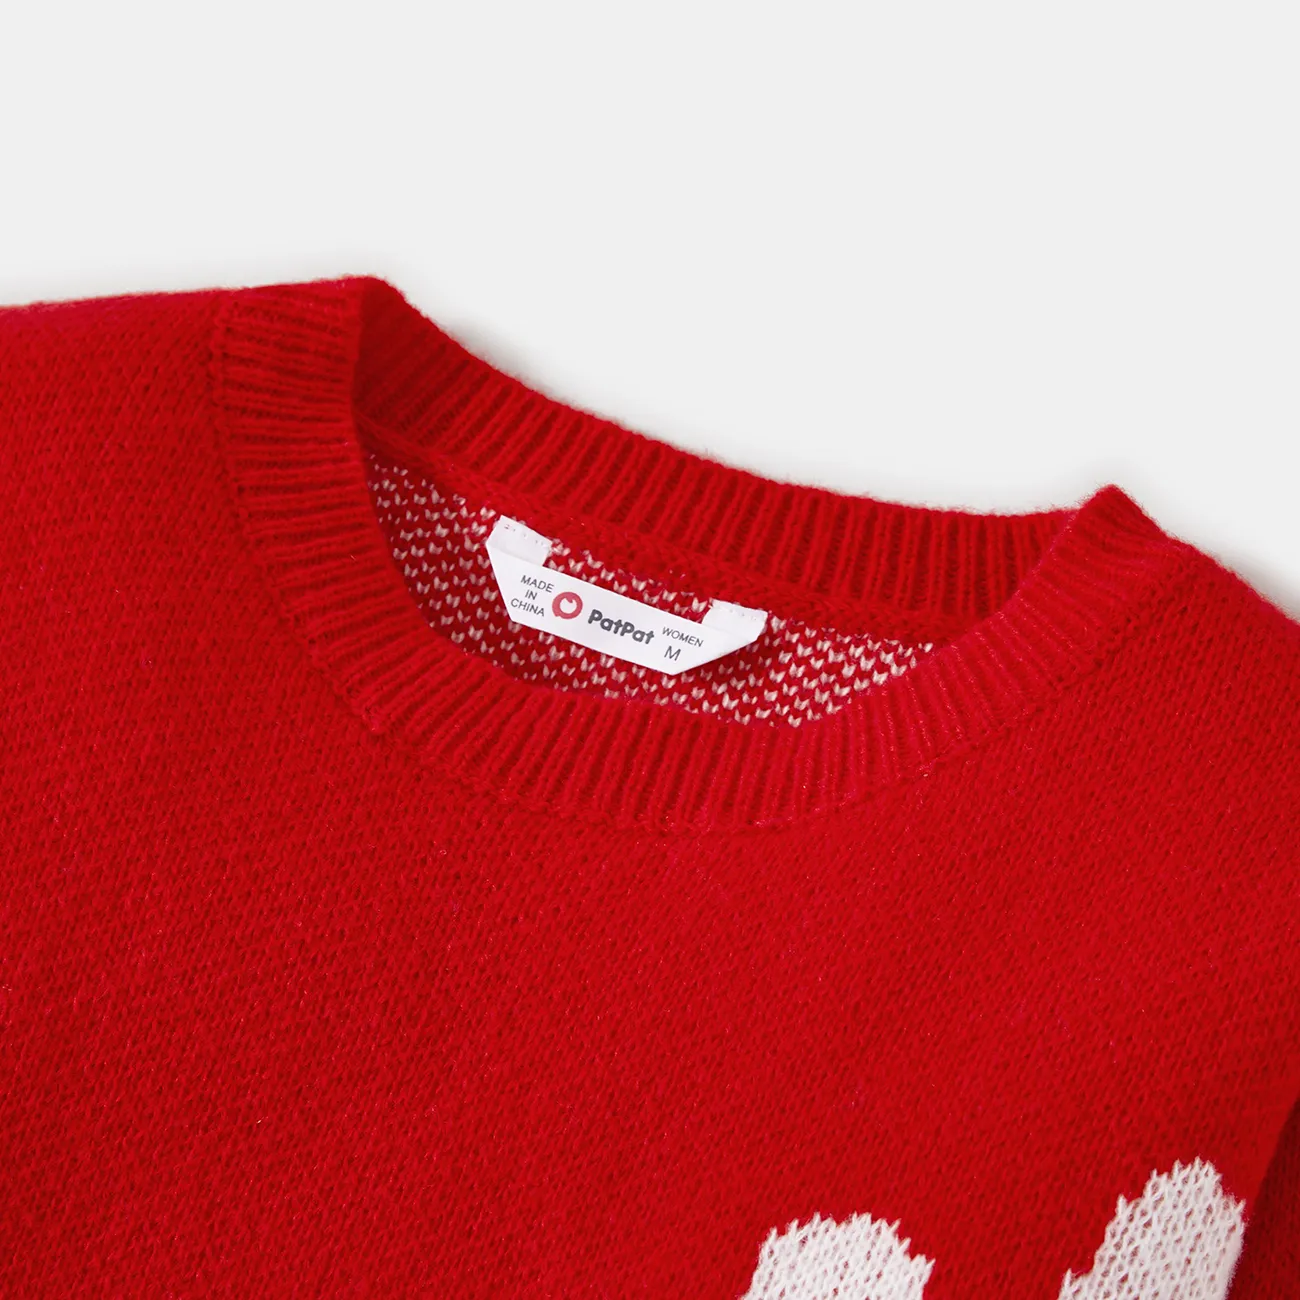 Christmas Family Matching Reindeer and Letter Print Red Sweaters Red big image 1